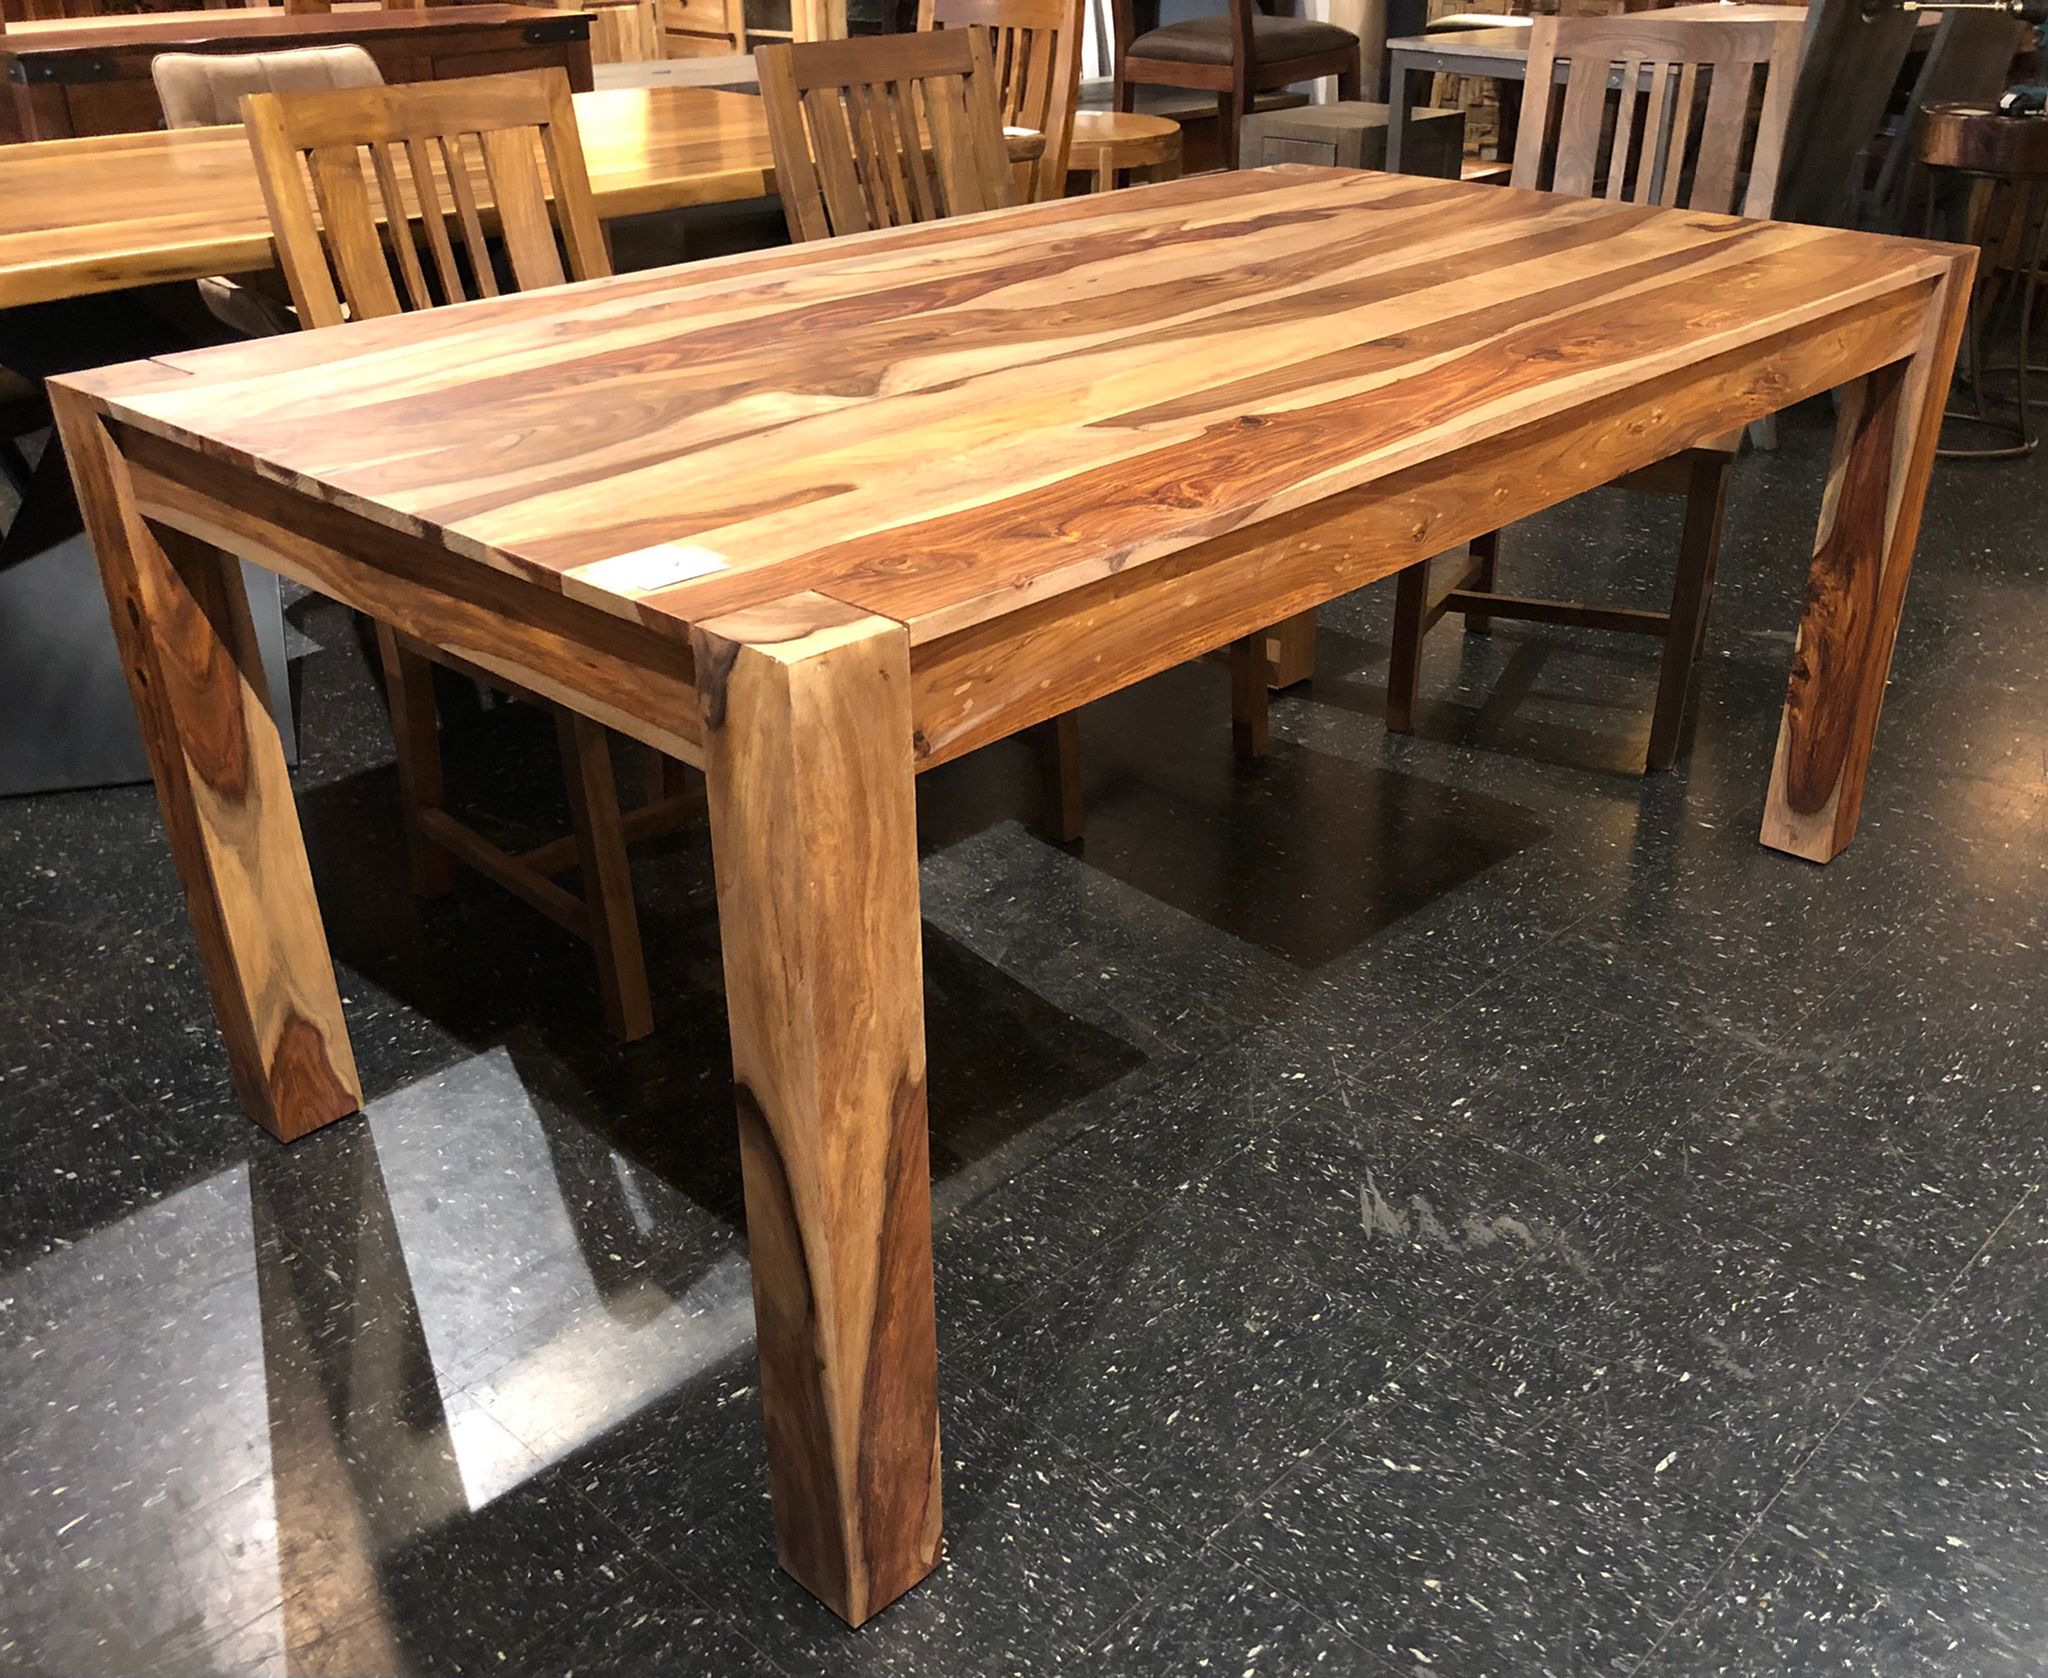 Indian rosewood dining table with corner post legs